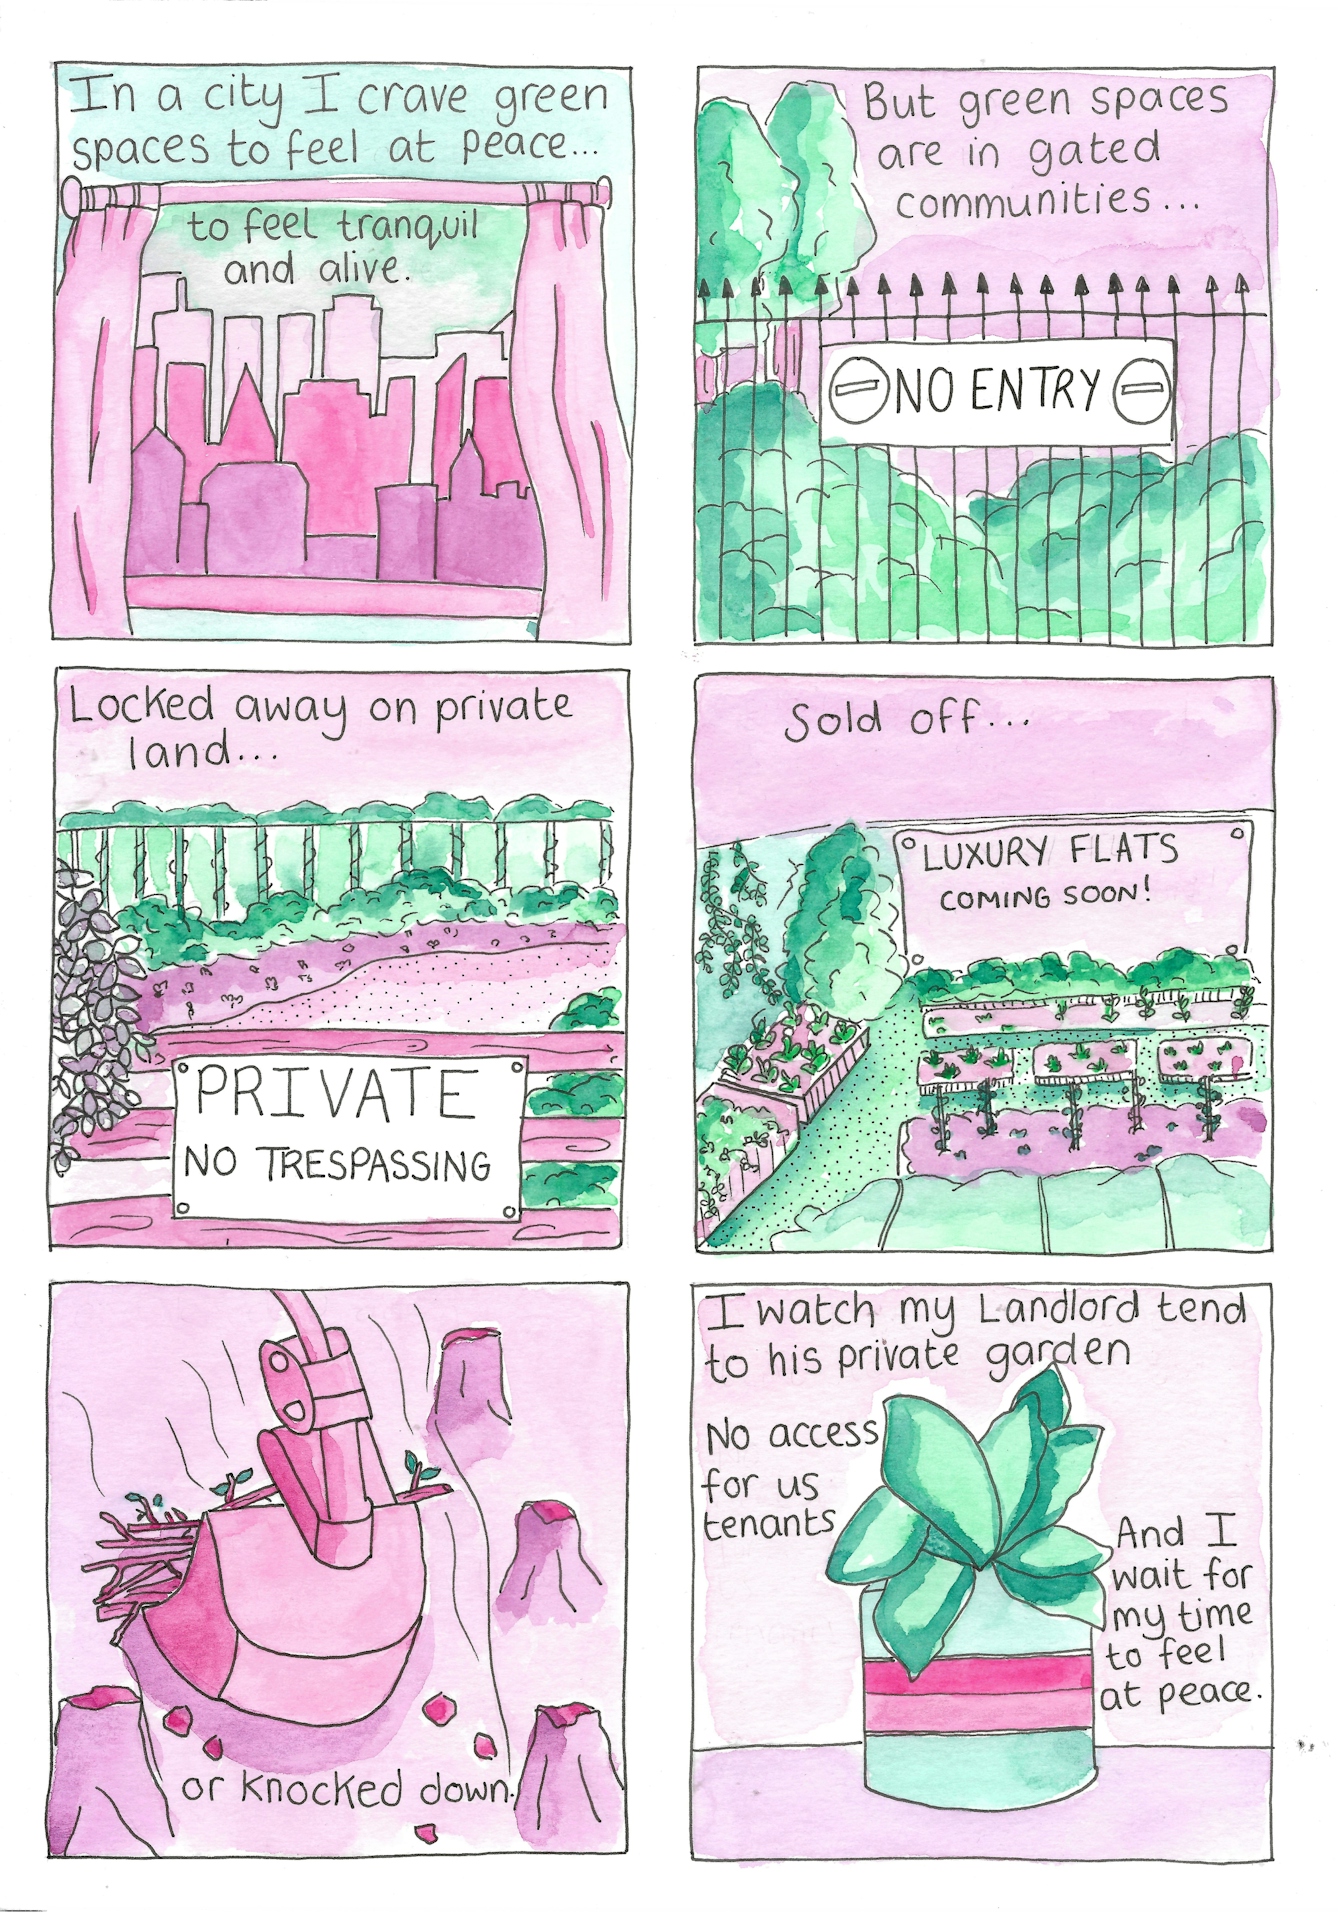 six-panel comic.
Panel 1 shows a cityscape through a window with the text "In a city I crave green spaces to feel at peace...to feel tranquil and alive."
Panel 2 shows a park behind spiked railings bearing a 'No Entry' sign with the text "But green spaces are gated communities..."
Panel 3 shows another gated green space bearing a sign reading 'Private: No Trespassing' with the text "Locked away on private land..."
Panel 4 shows another green space with a billboard advertising luxury flats coming soon with the text "Sold off..."
Panel 5 shows a bulldozer pulling up trees with the text "or knocked down"
Panel 6 shows a small houseplant with the text "I watch my landlord tend to his private garden. No access for us tenants. And I wait for my time to feel at peace."